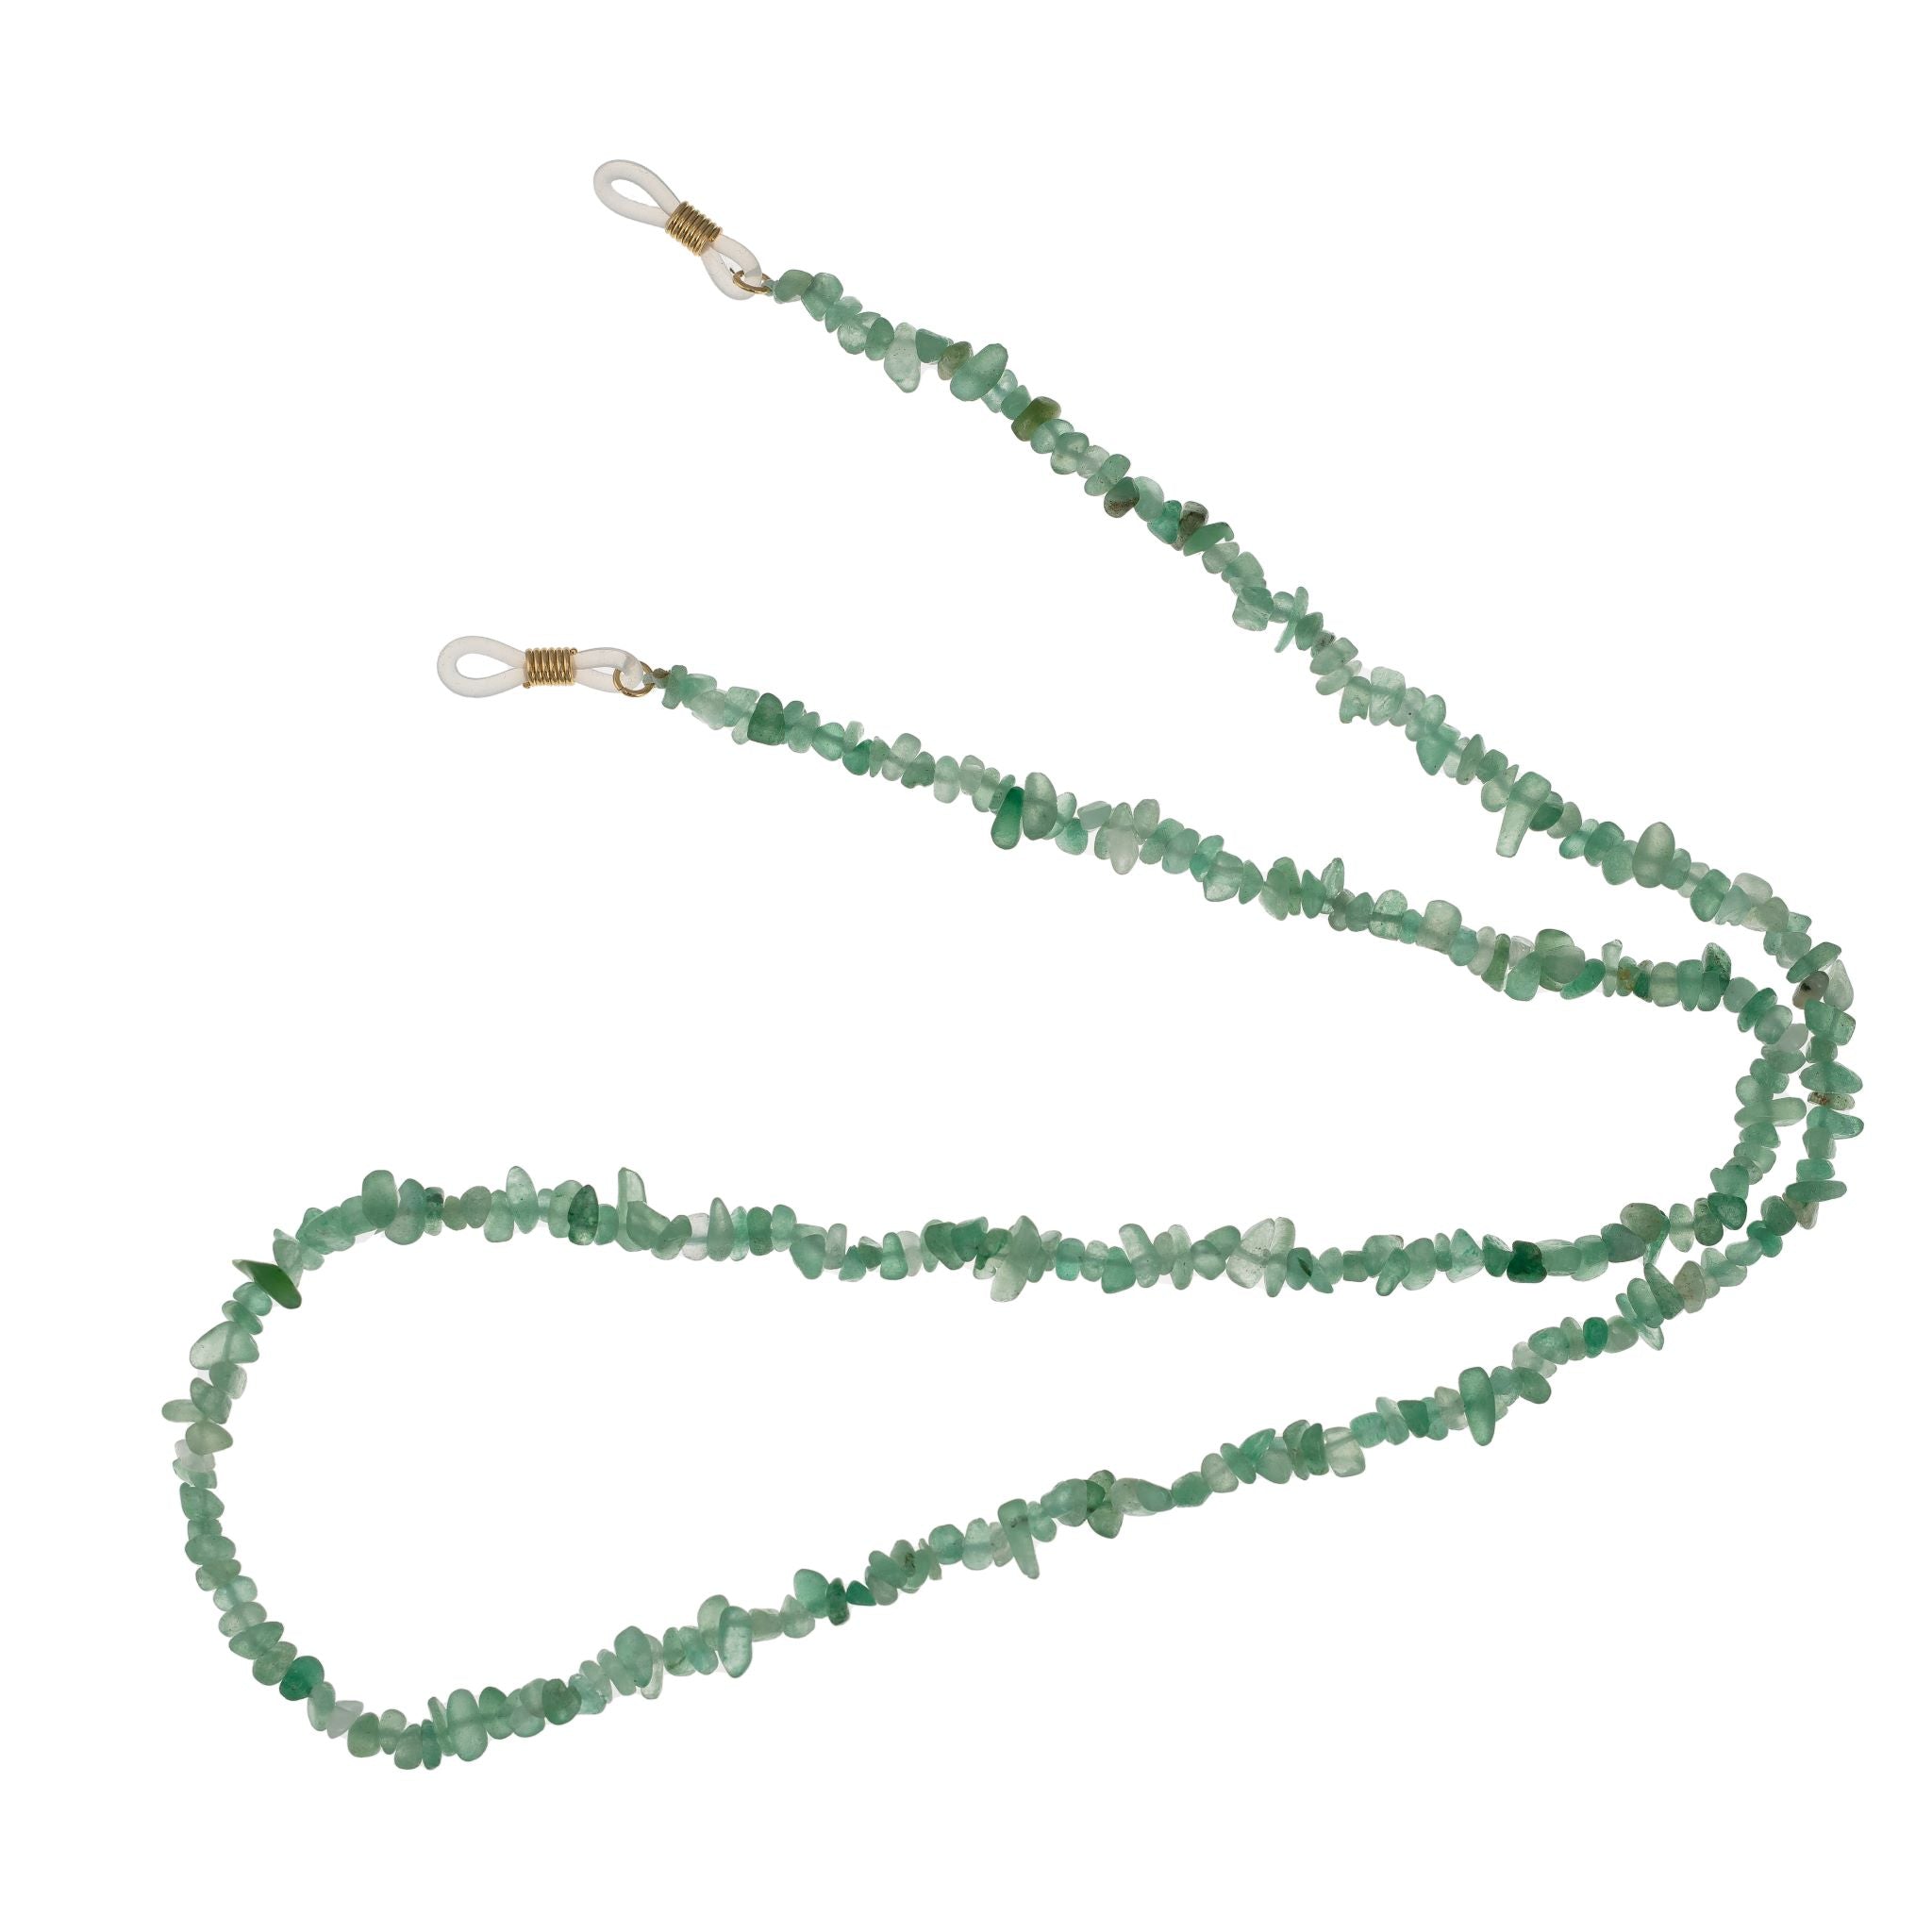 NEW! Chip Stone Sunglasses Chain Cucumber by TALIS CHAINS